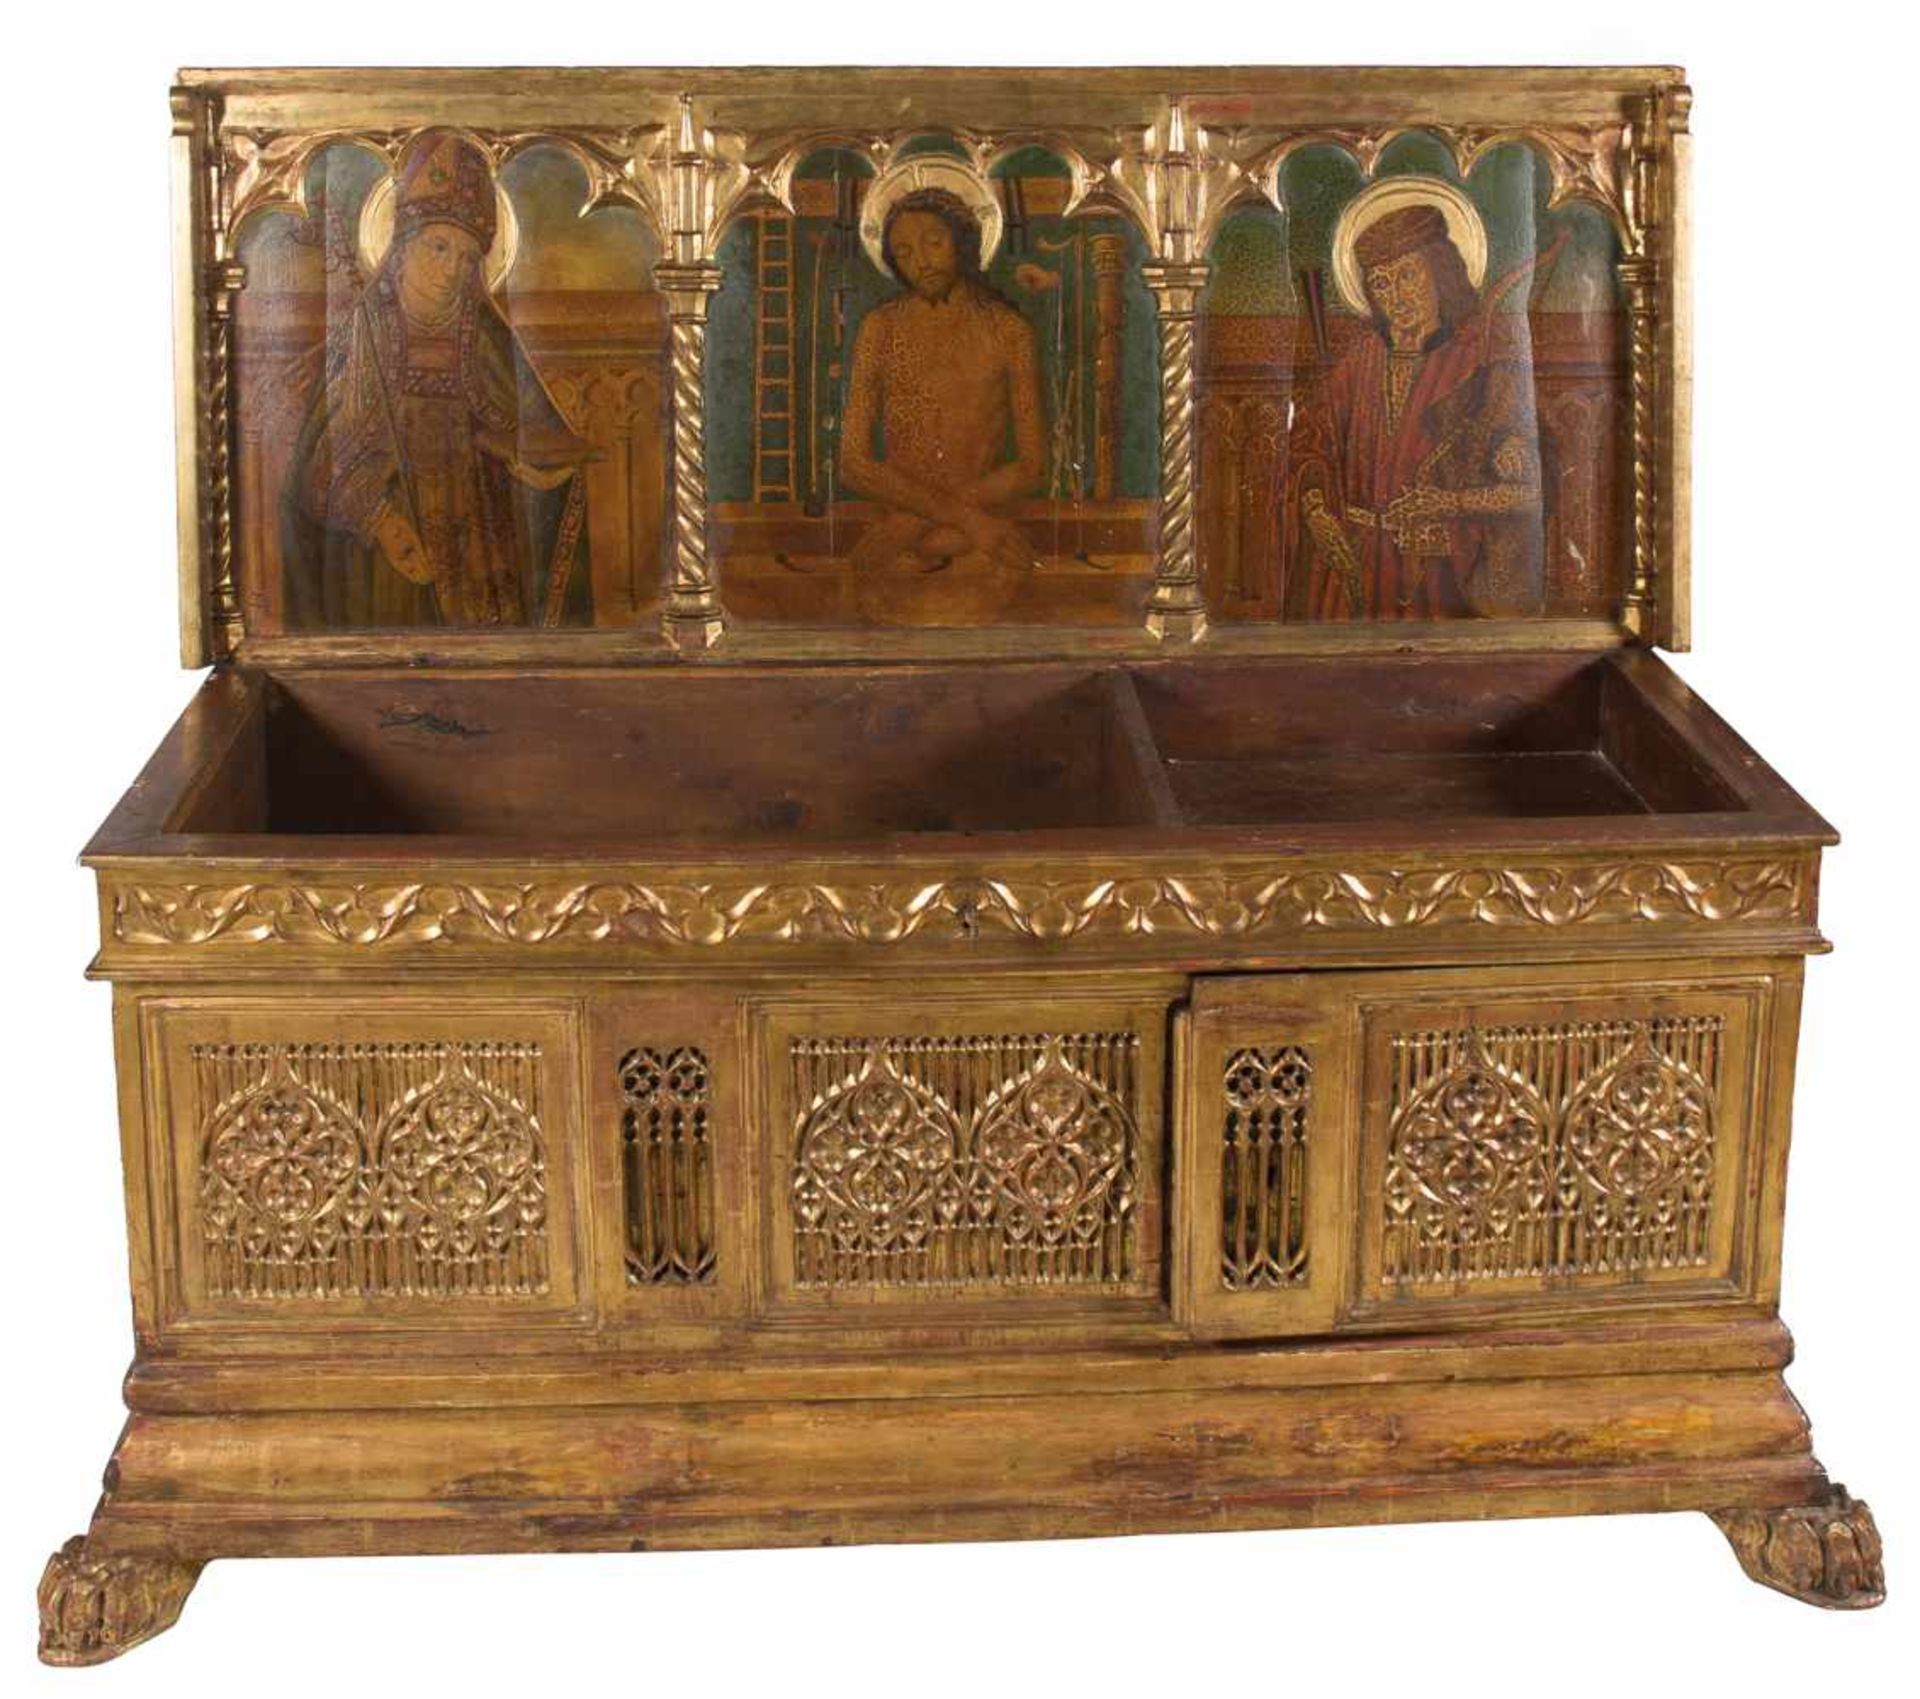 Carved, gilded and painted wooden trousseau chest. Catalonia. Gothic. Circa 1500.↵↵The inside of the